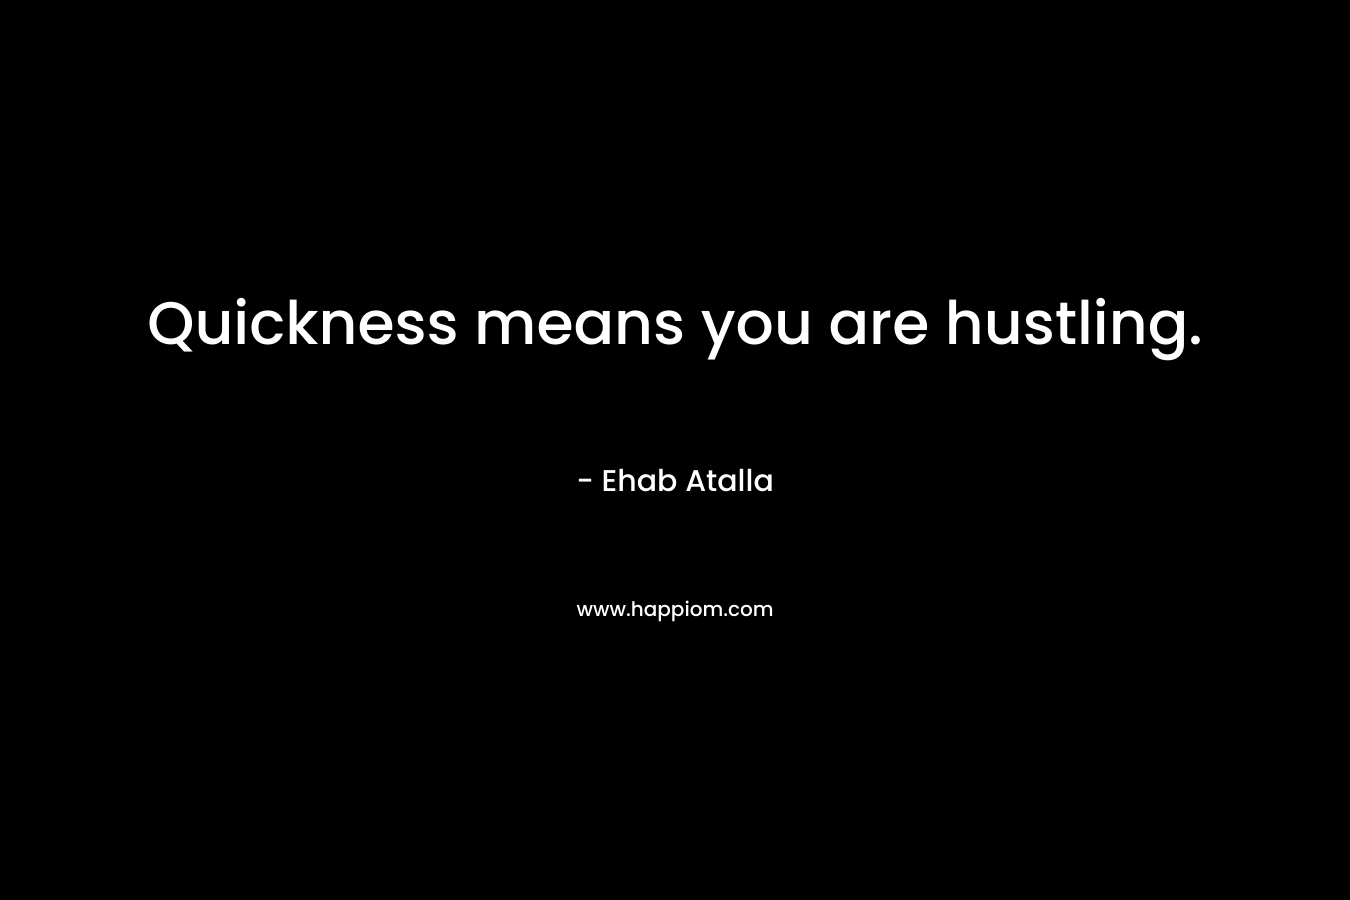 Quickness means you are hustling.